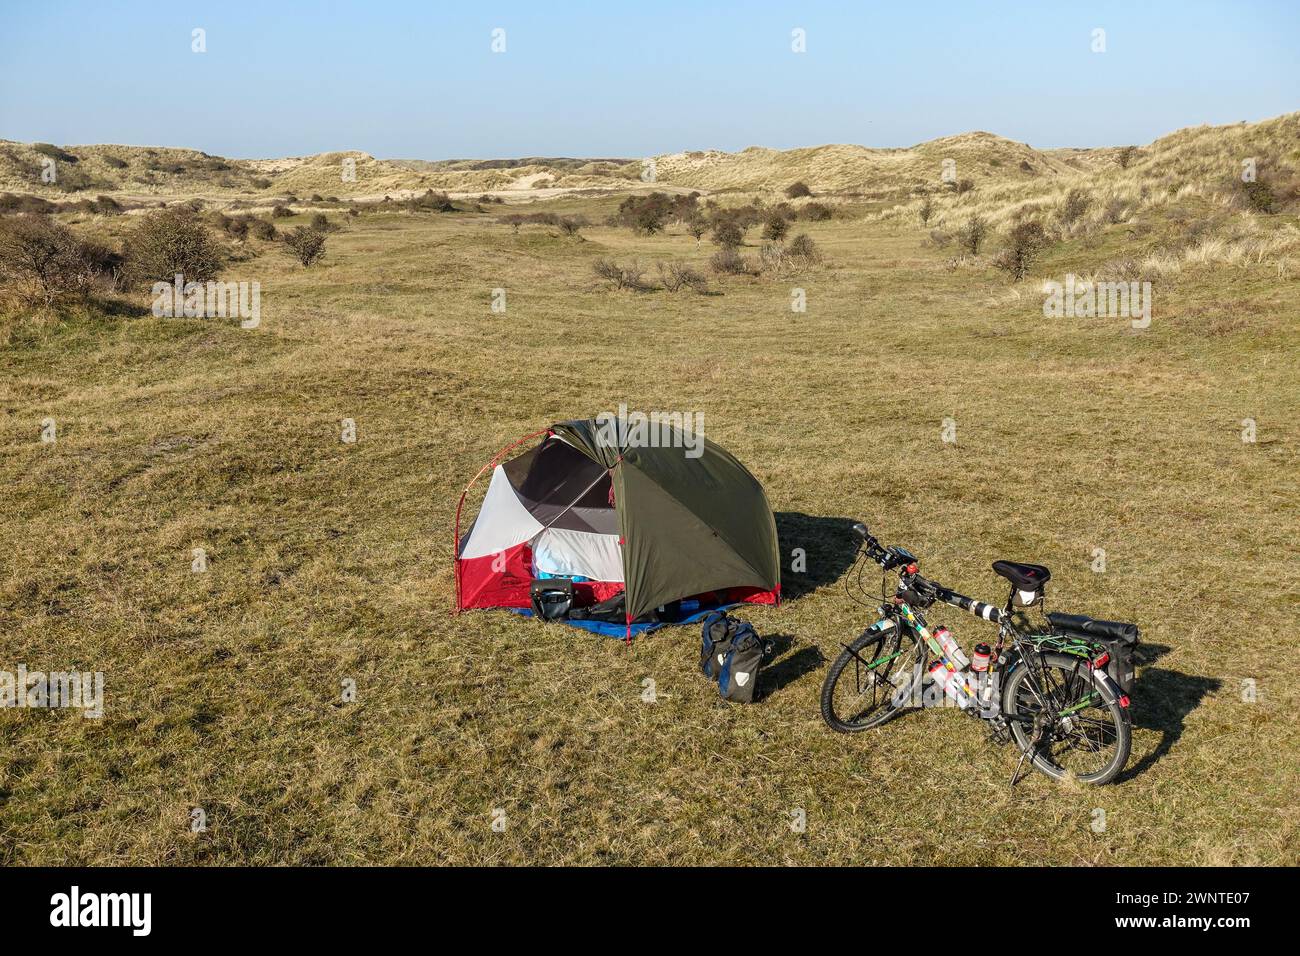 Camping tent and bicycle in grassy dunes under clear sky, in North Holland, Netherlands Stock Photo